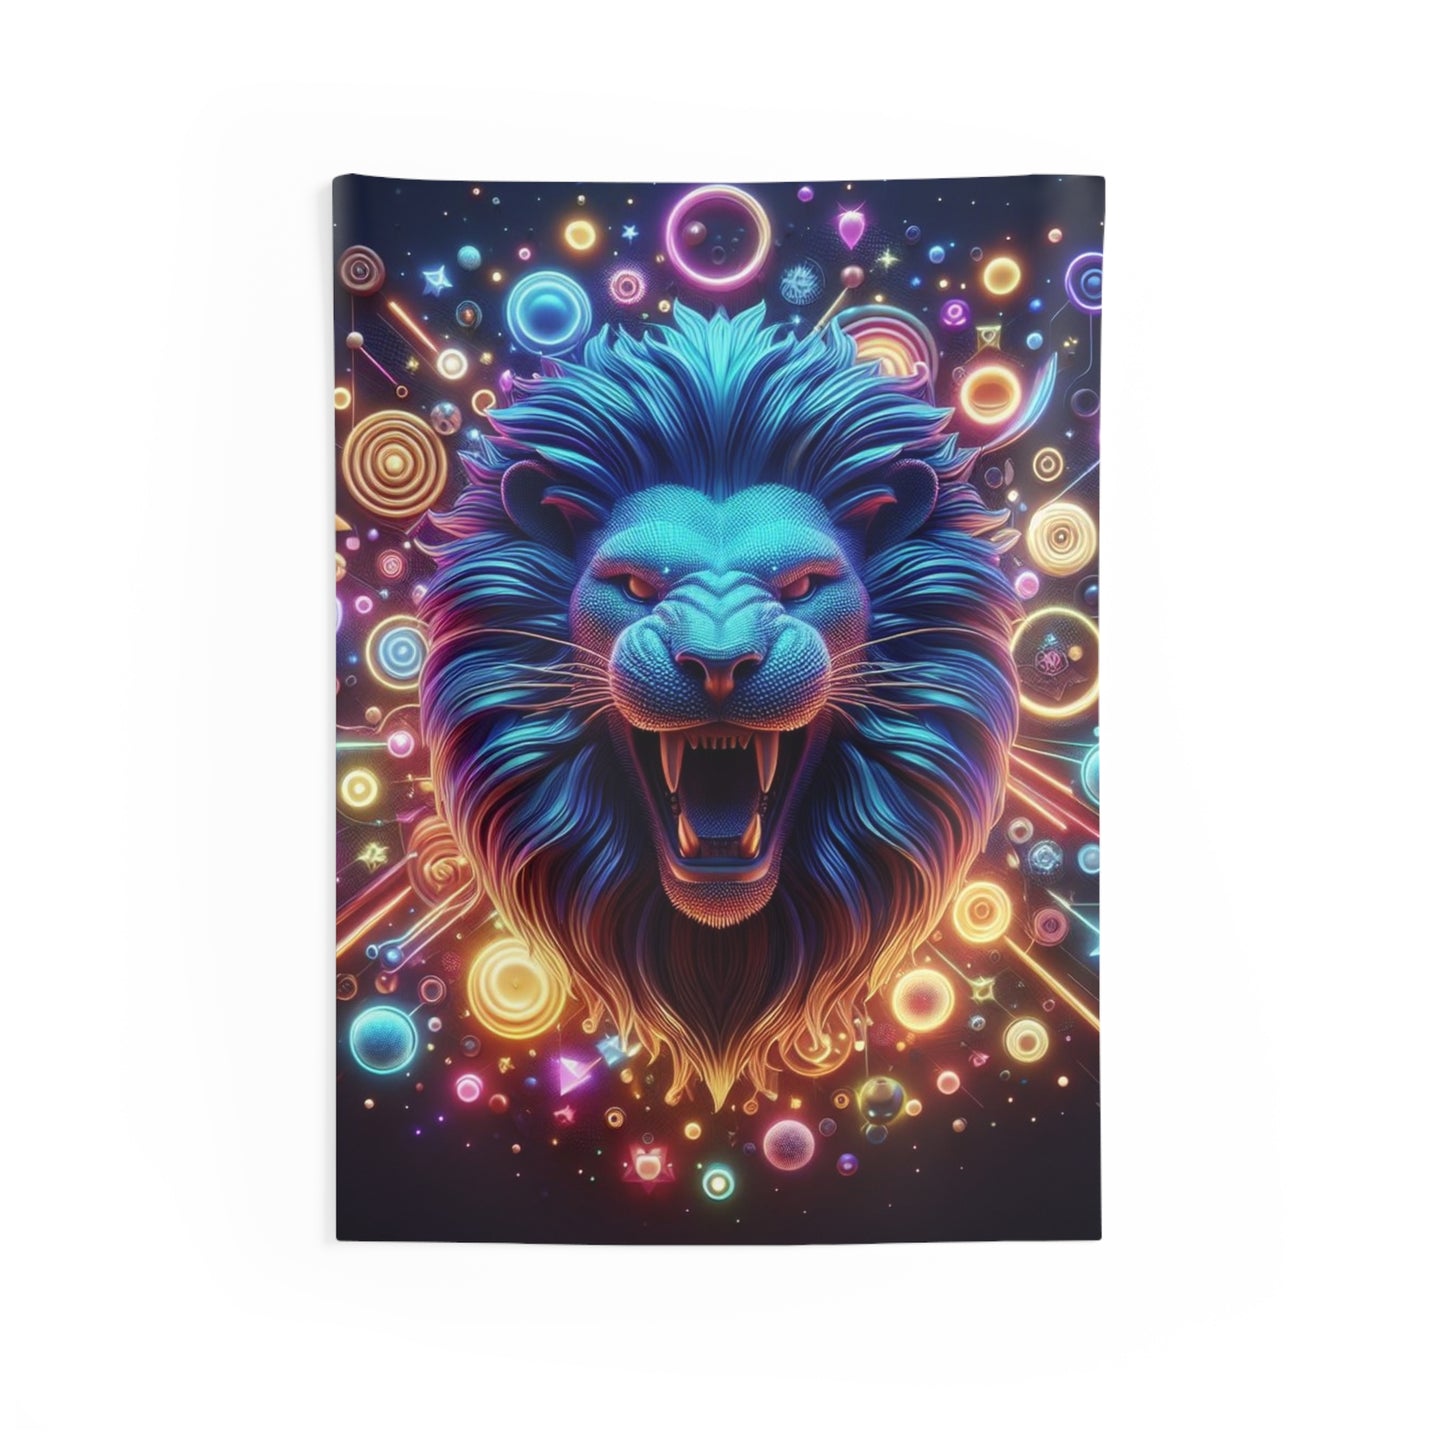 The Lions Roar - Indoor Wall Tapestries